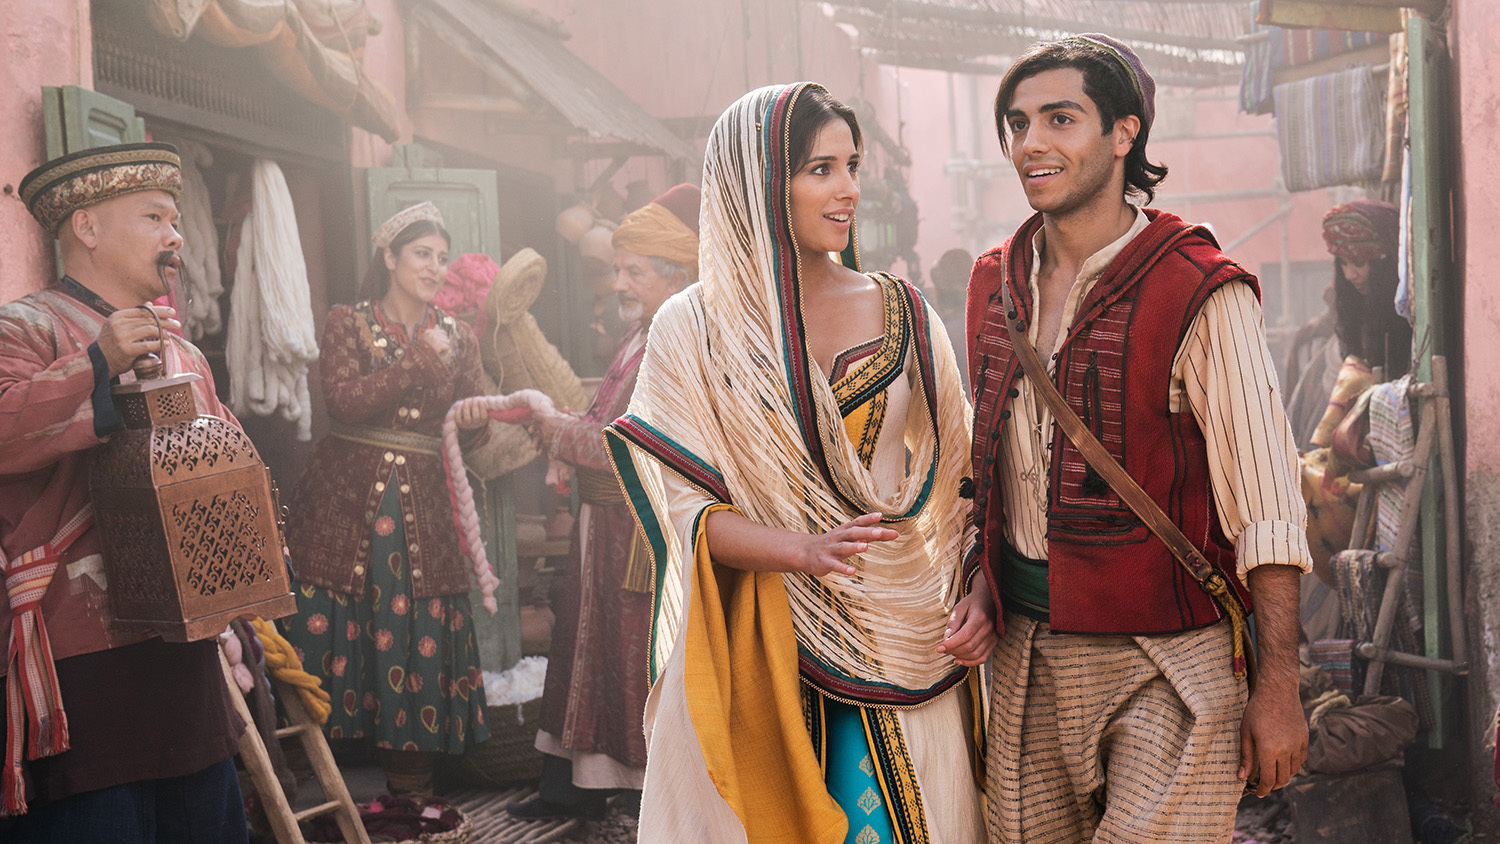 Naomi Scott as Jasmine and Mena Massoud as Aladdin in Disney’s live-action adaptation of ALADDIN, directed by Guy Ritchie.